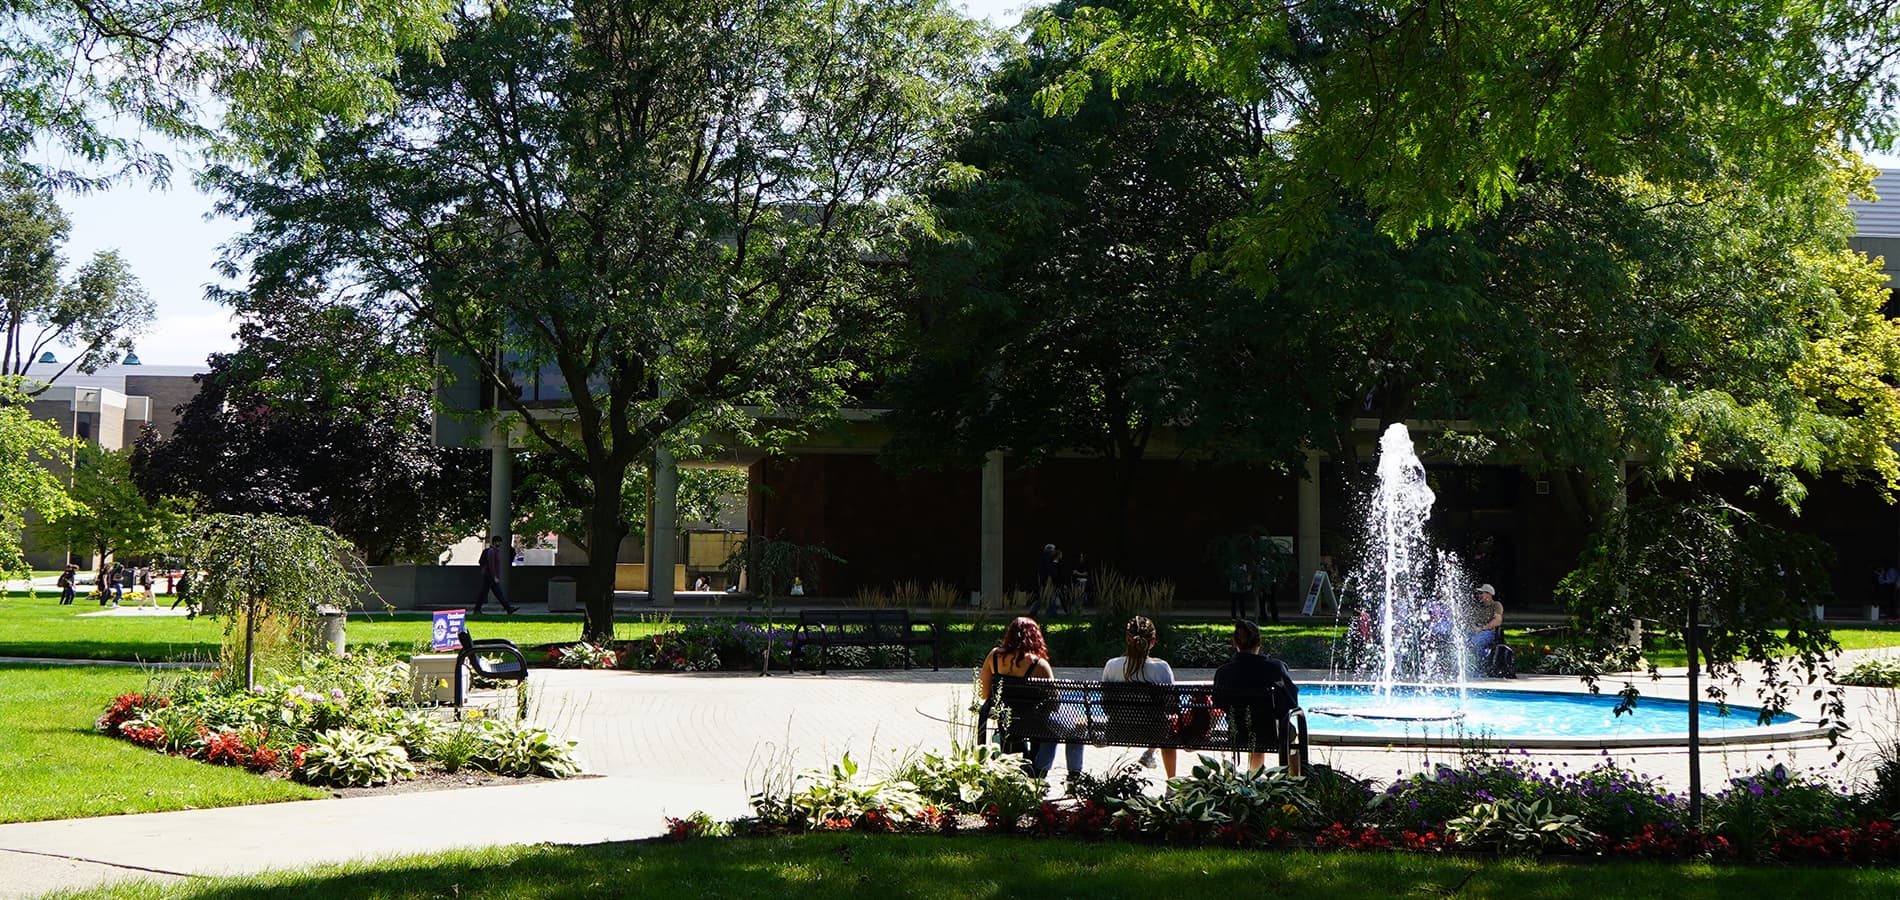 An outdoor photo on the McNichols Campus, featuring students sitting on benches, the Memorial clock tower, water fountain, trees, flowers and buildings during a sunny summer day.